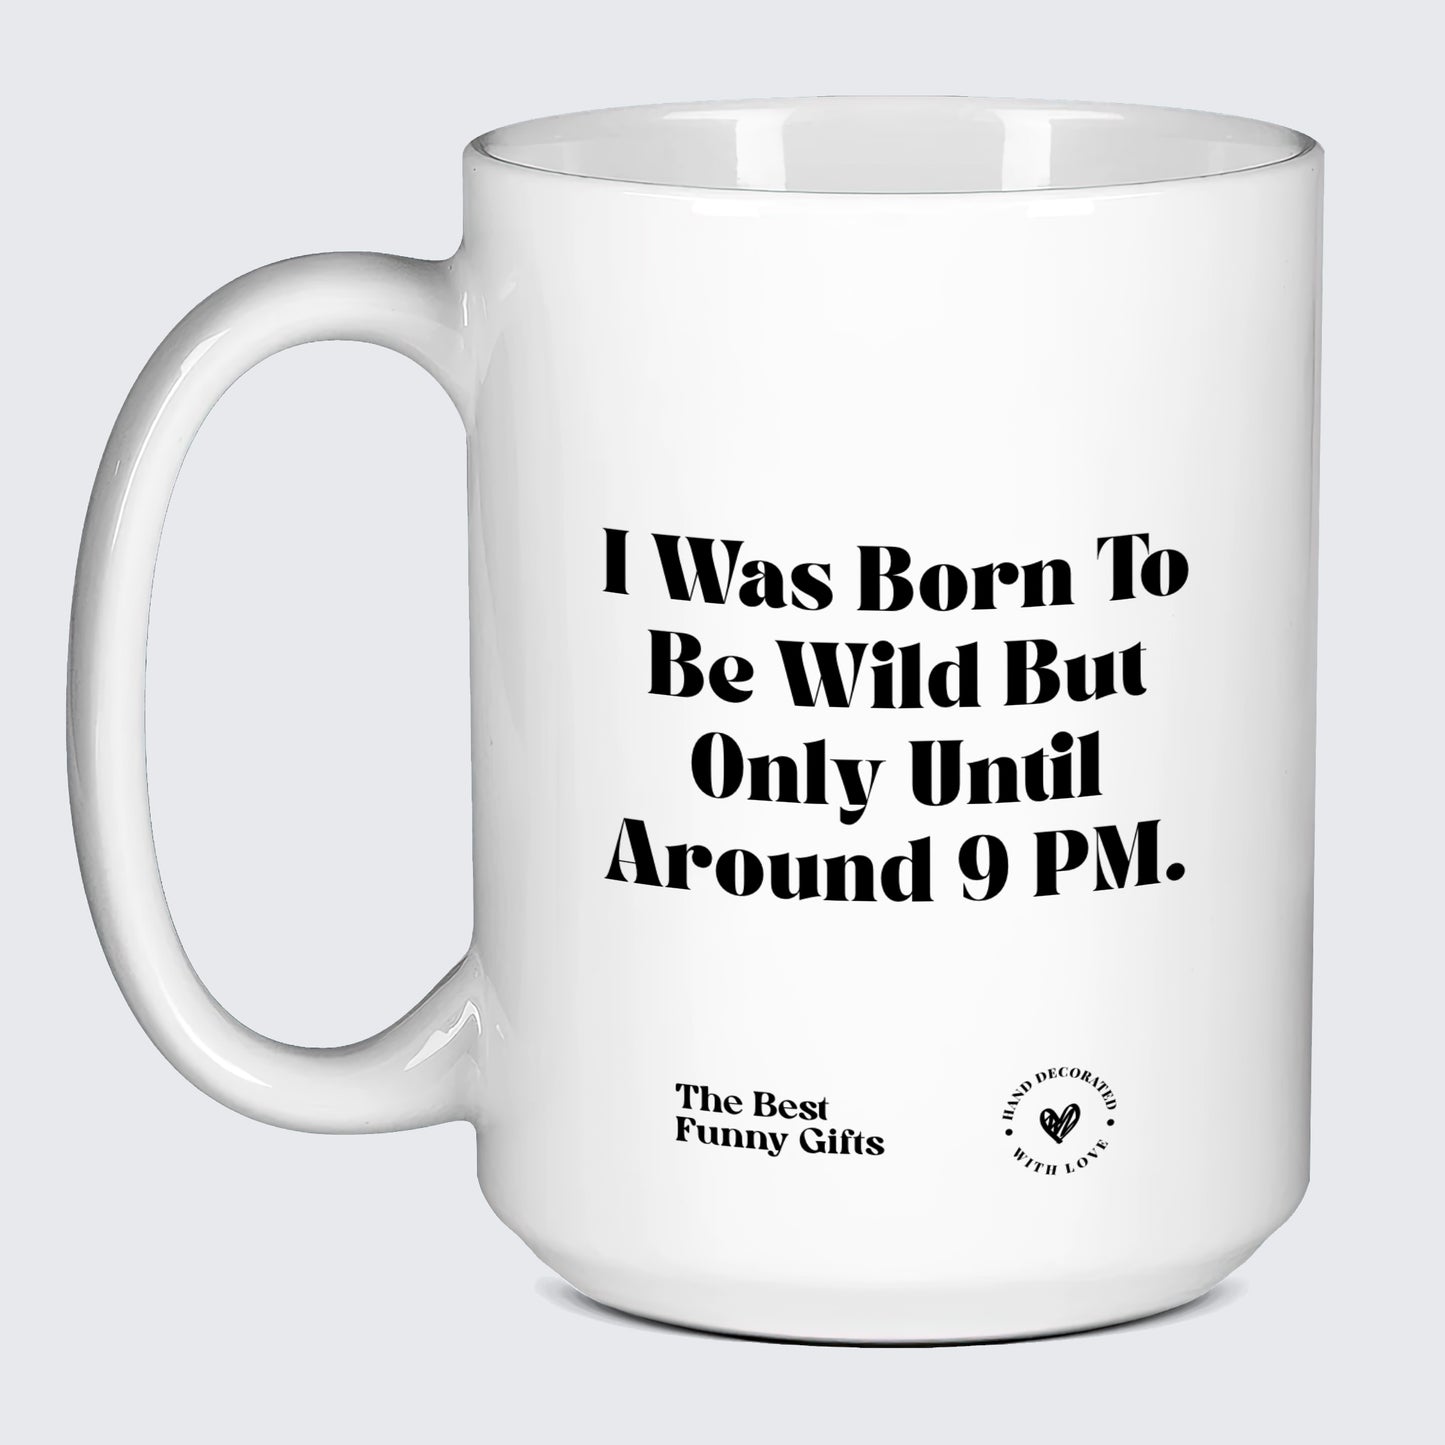 Funny Mugs I Was Born to Be Wild but Only Until Around 9 Pm. - The Best Funny Gifts